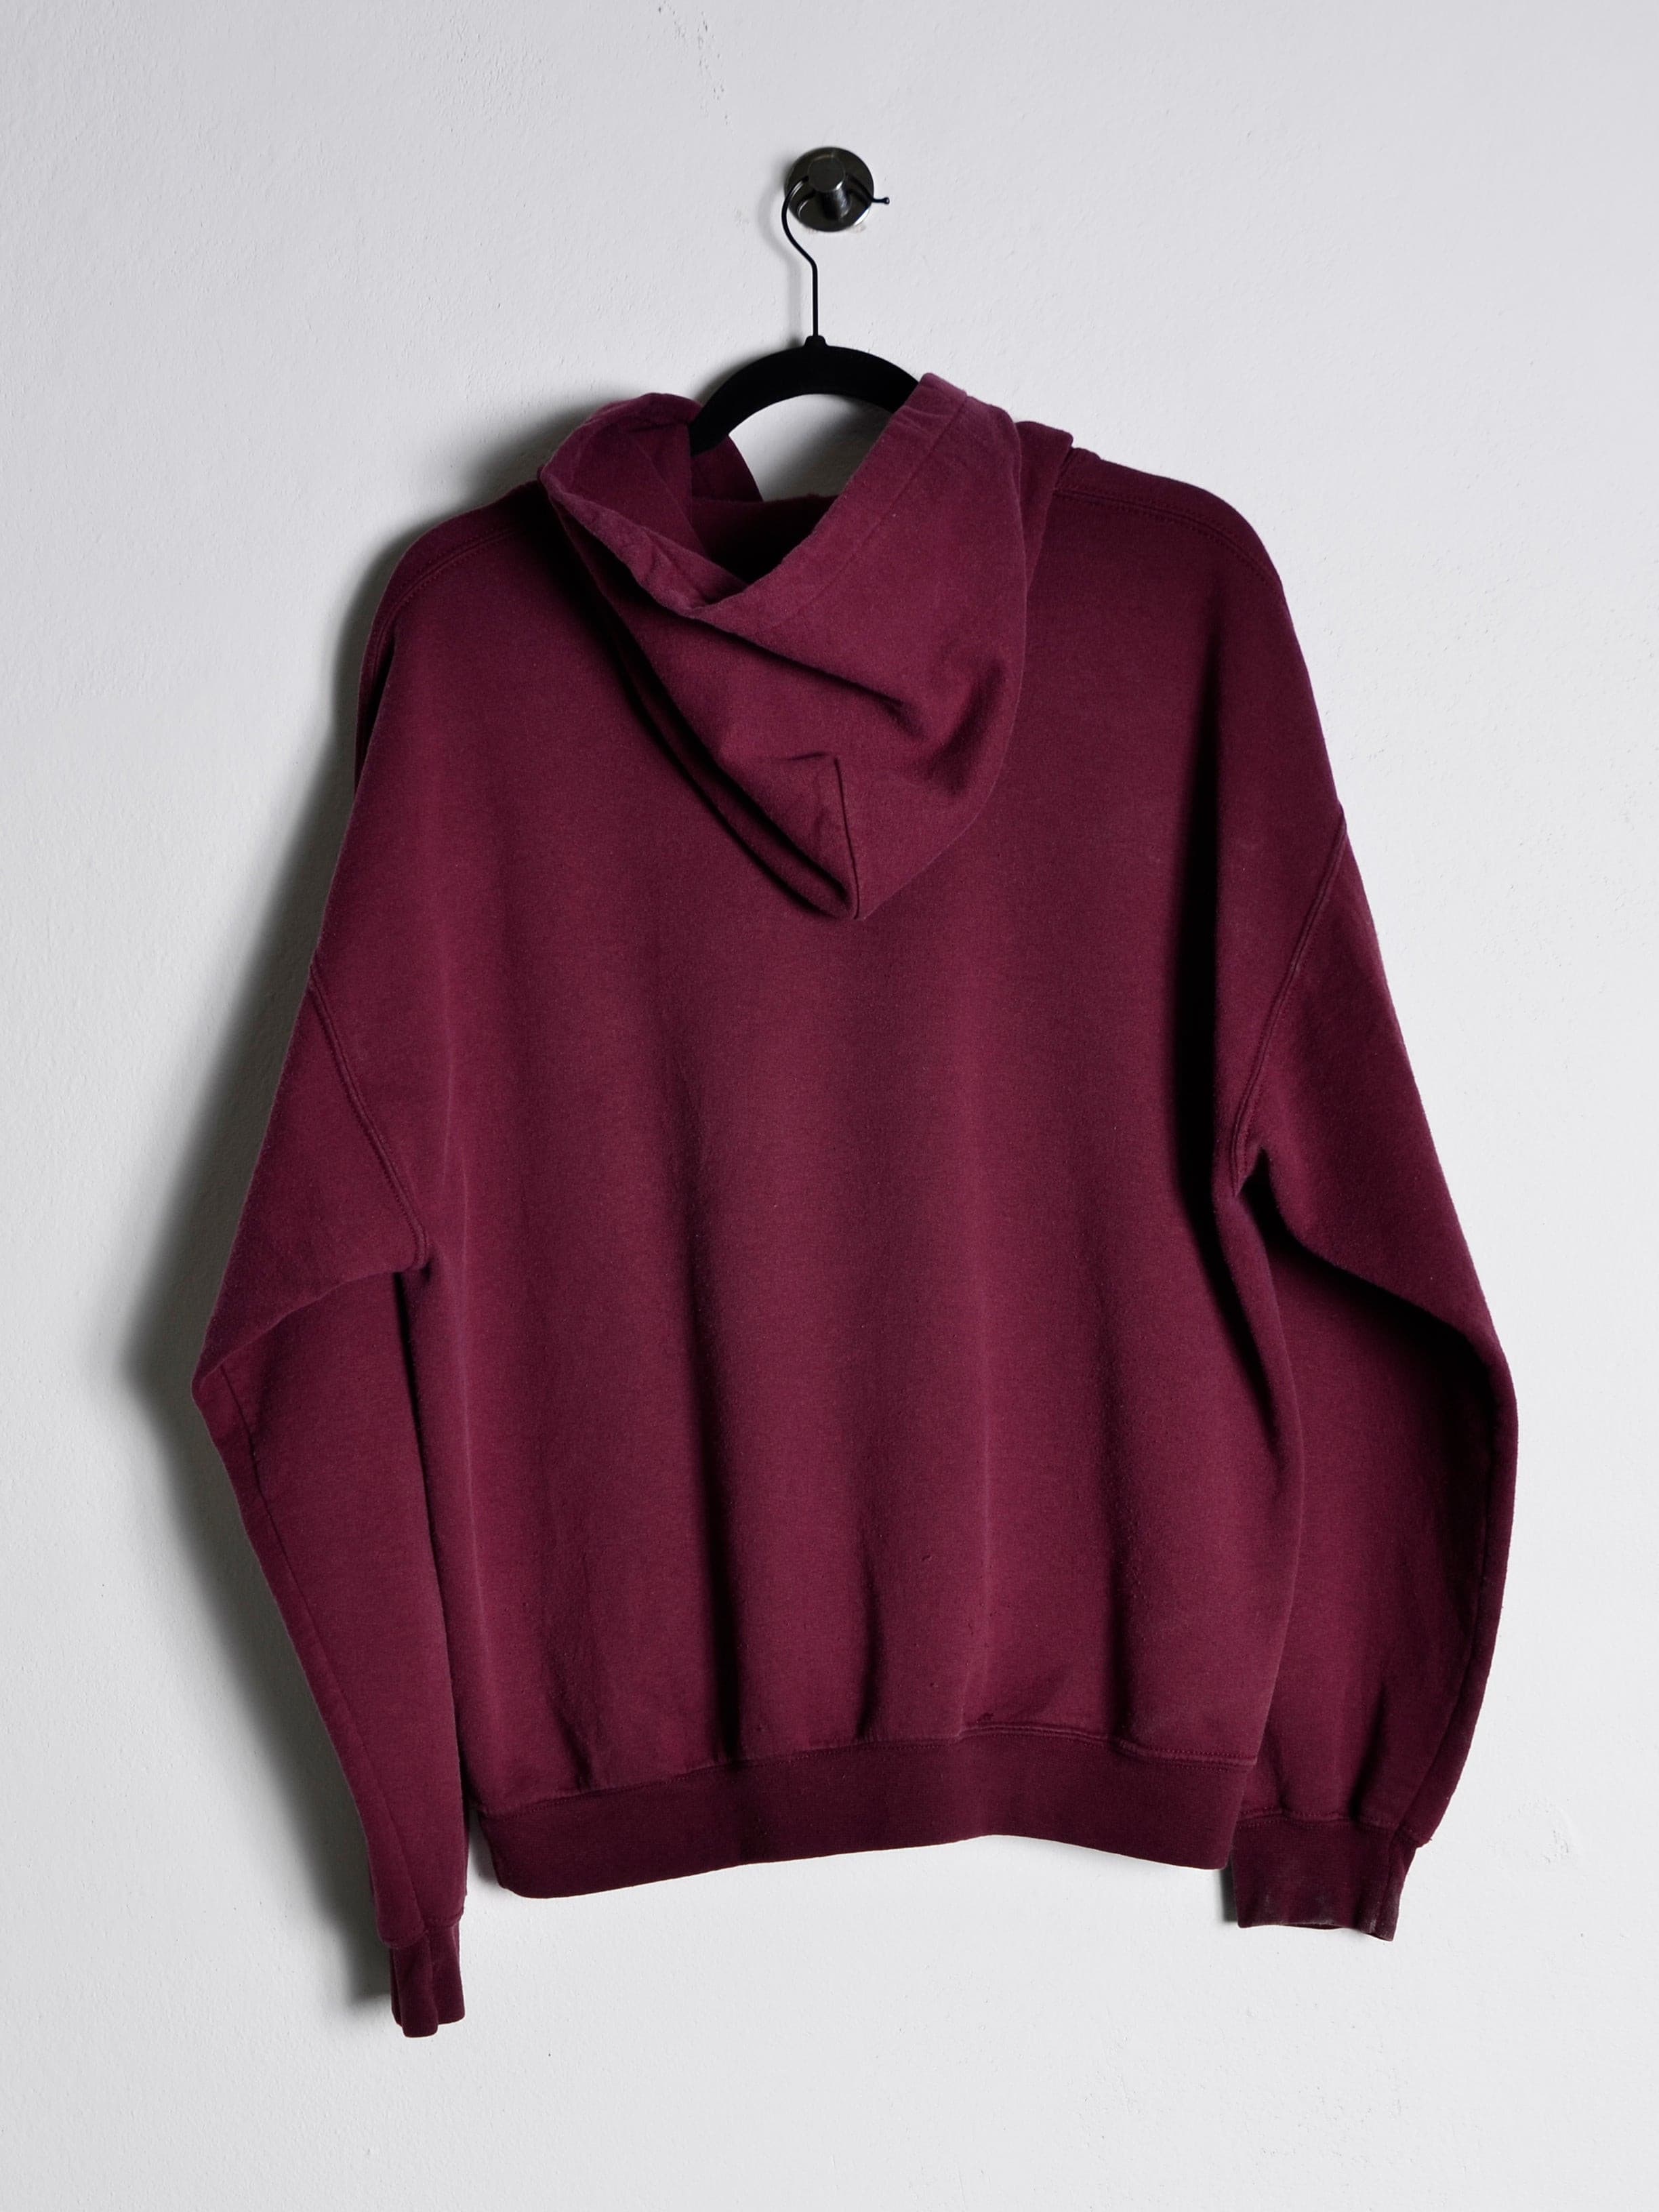 Mesquite Soccer Hoodie Red // Small - RHAGHOUSE VINTAGE